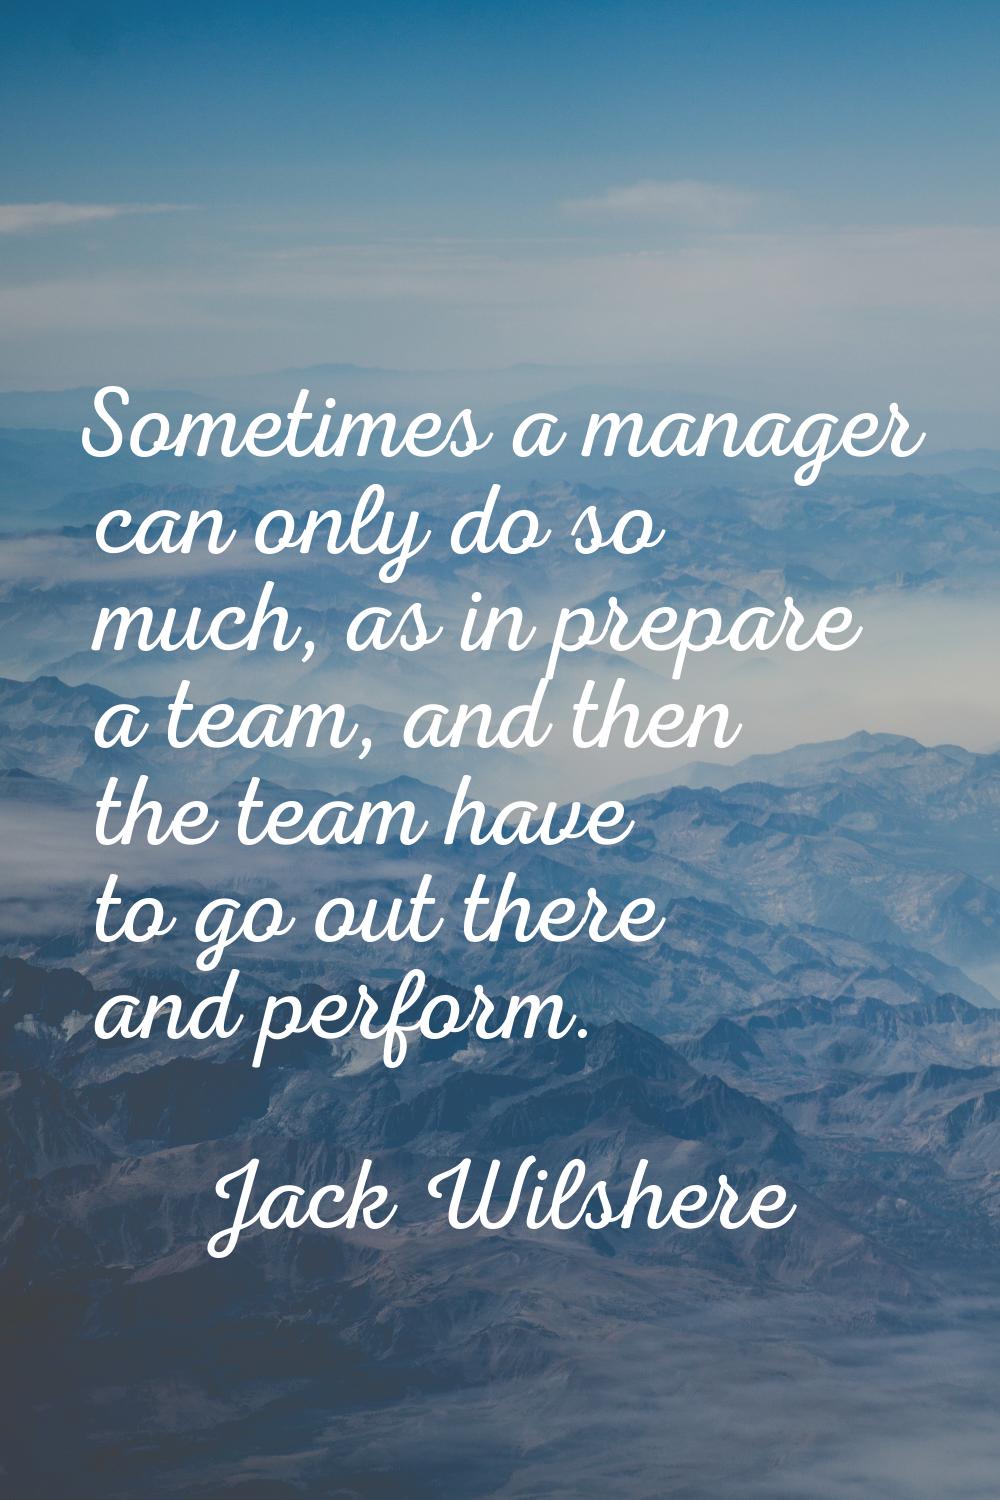 Sometimes a manager can only do so much, as in prepare a team, and then the team have to go out the